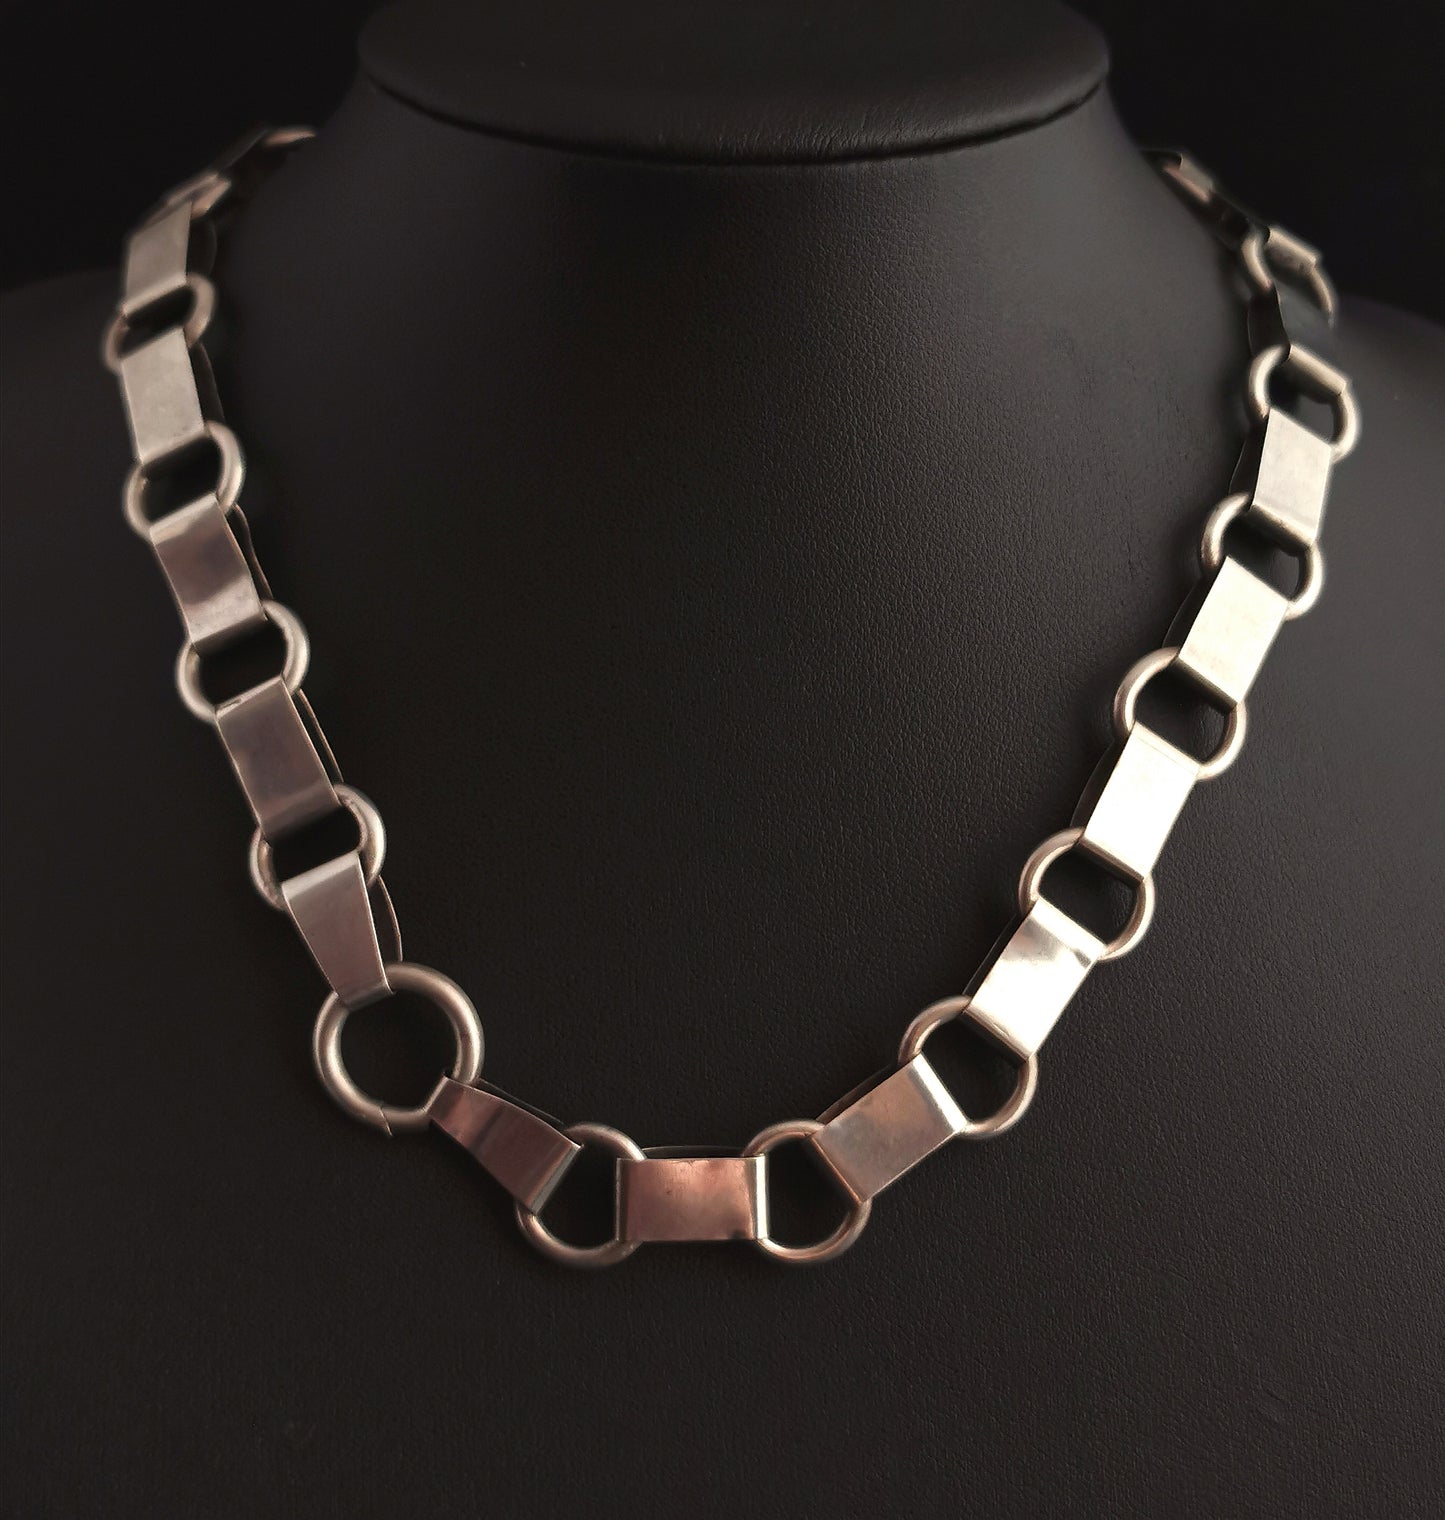 Antique Victorian silver collar necklace, engraved links